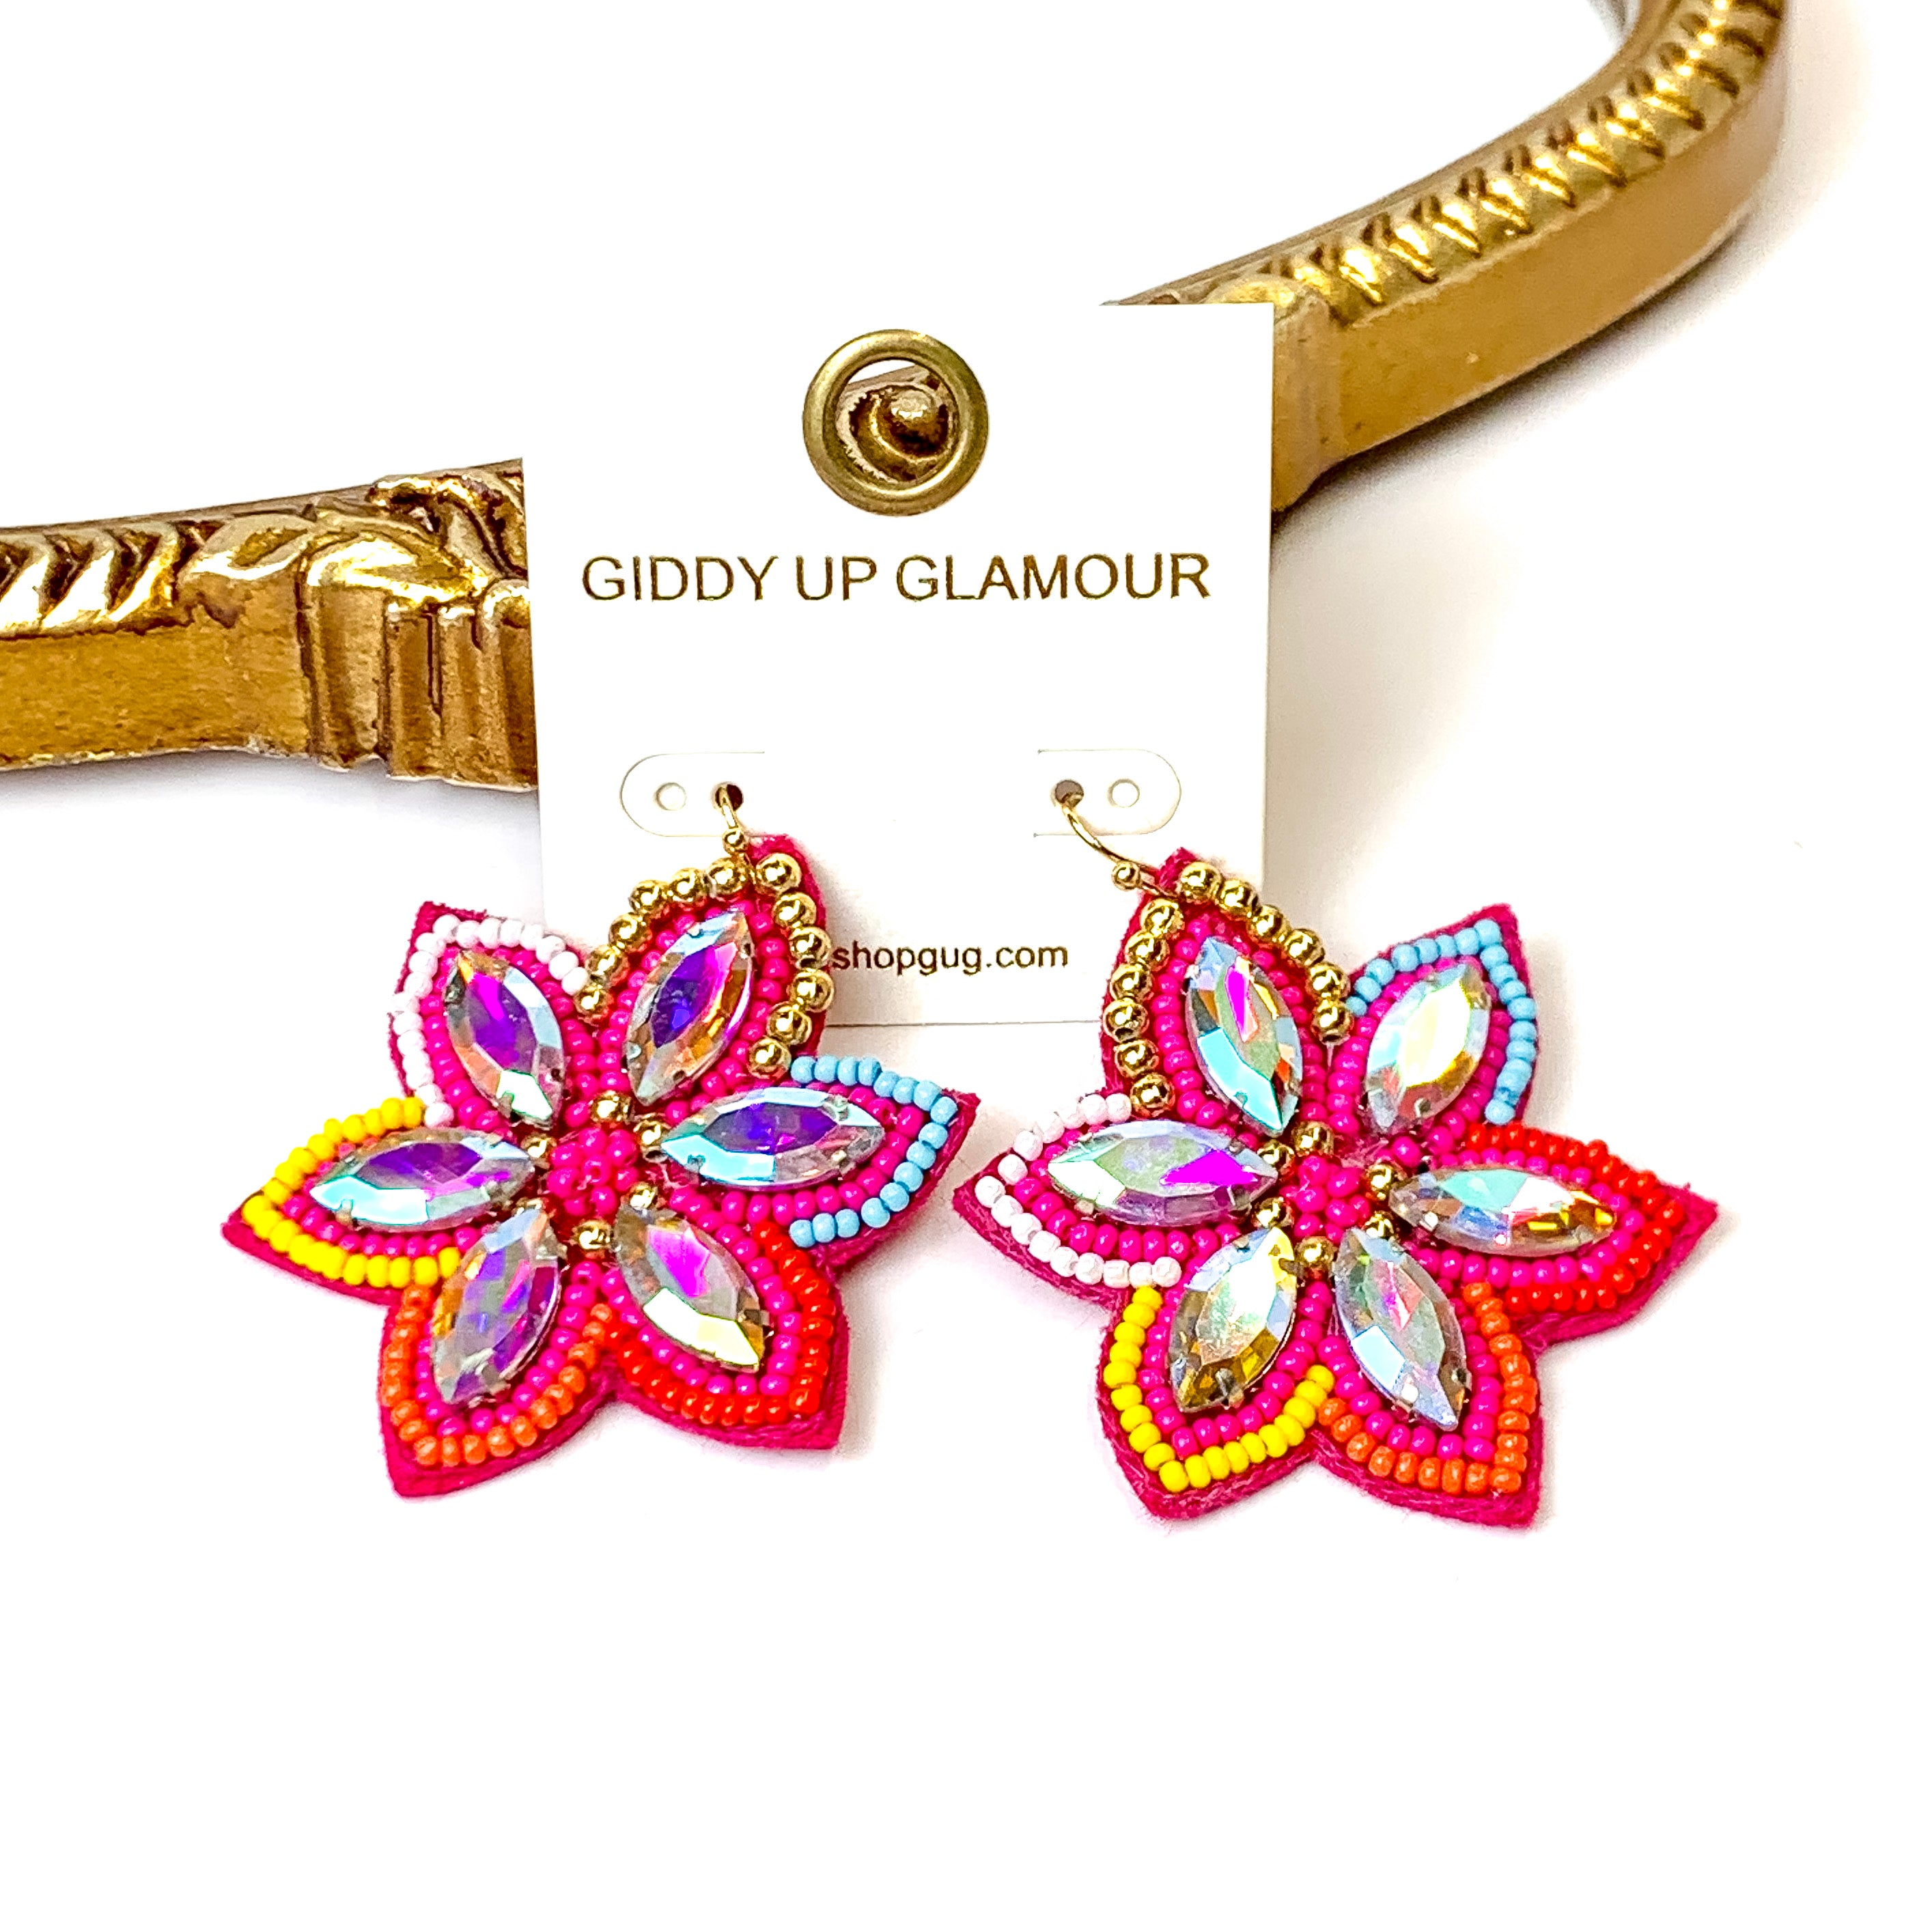 Desert Daisy Multicolored Flower Shaped Earrings with AB Crystal Accents in Fuchsia Pink